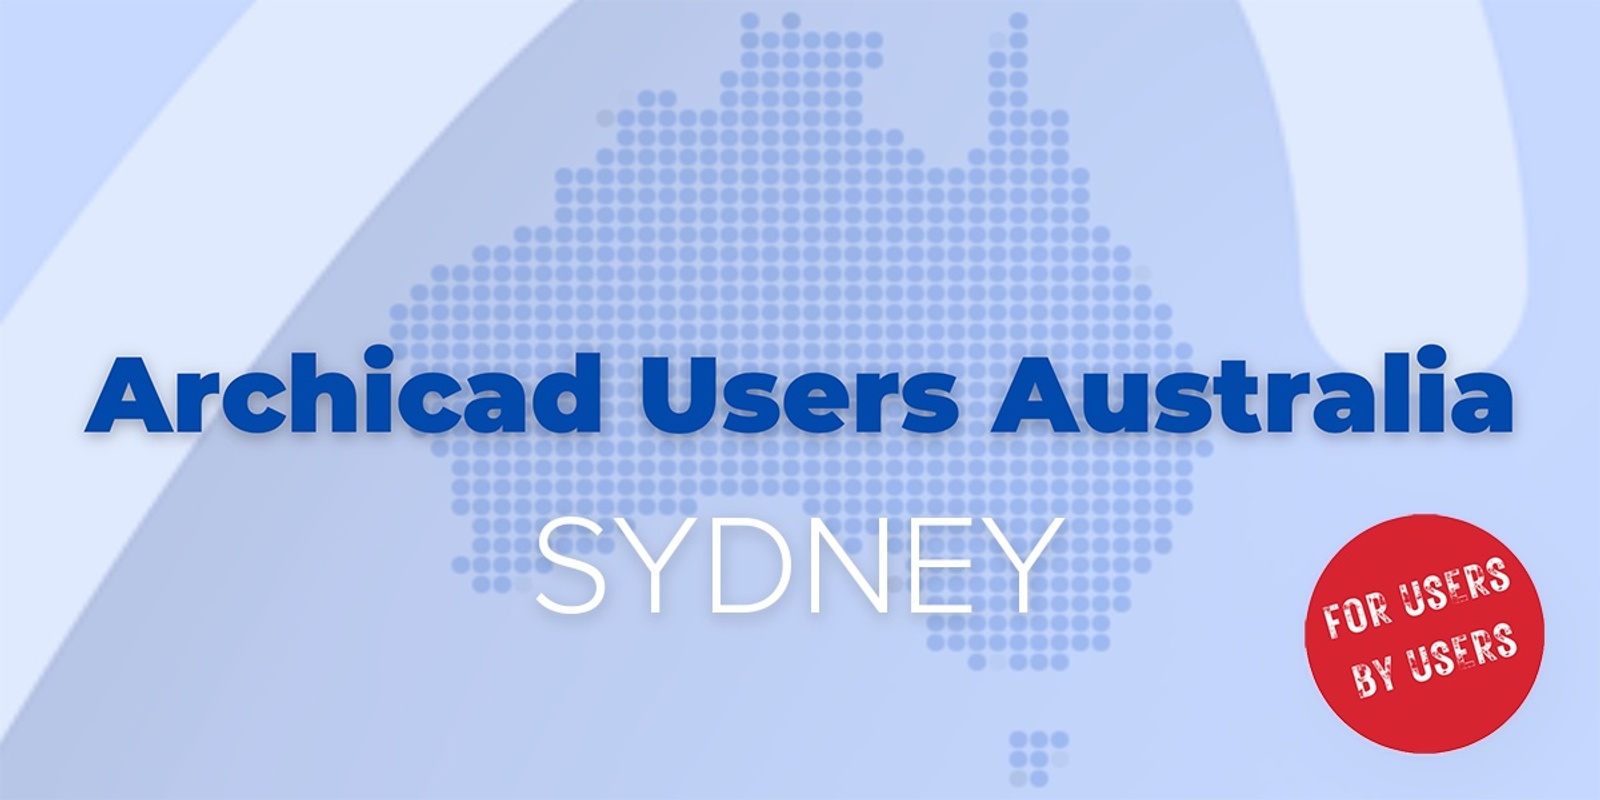 Banner image for Archicad Users Australia | Sydney | 24.07.11 Event